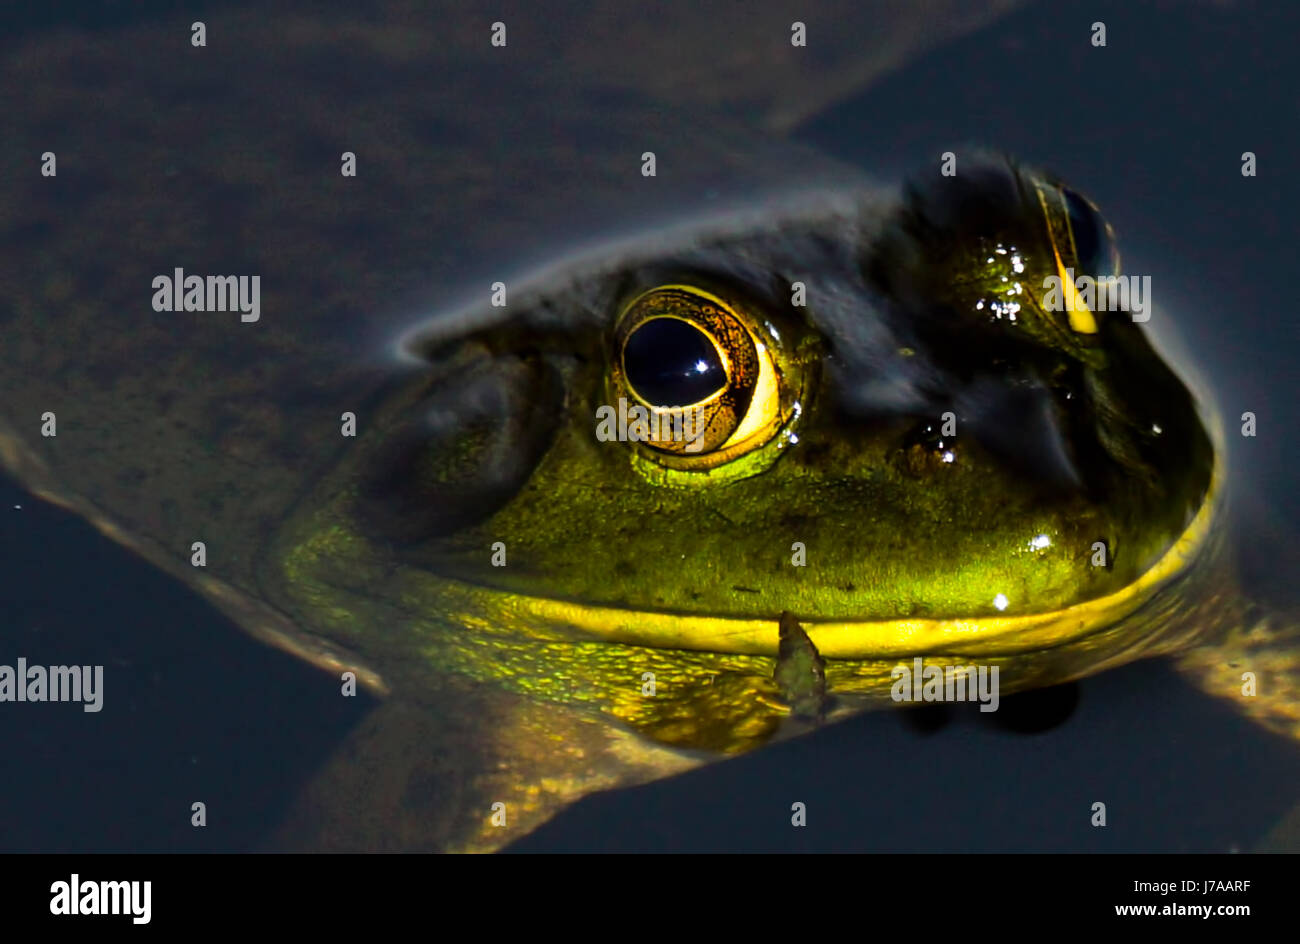 An invasive American Bullfrog out for a swim in Beaver Lake.  Watch out for the Heron! Stock Photo